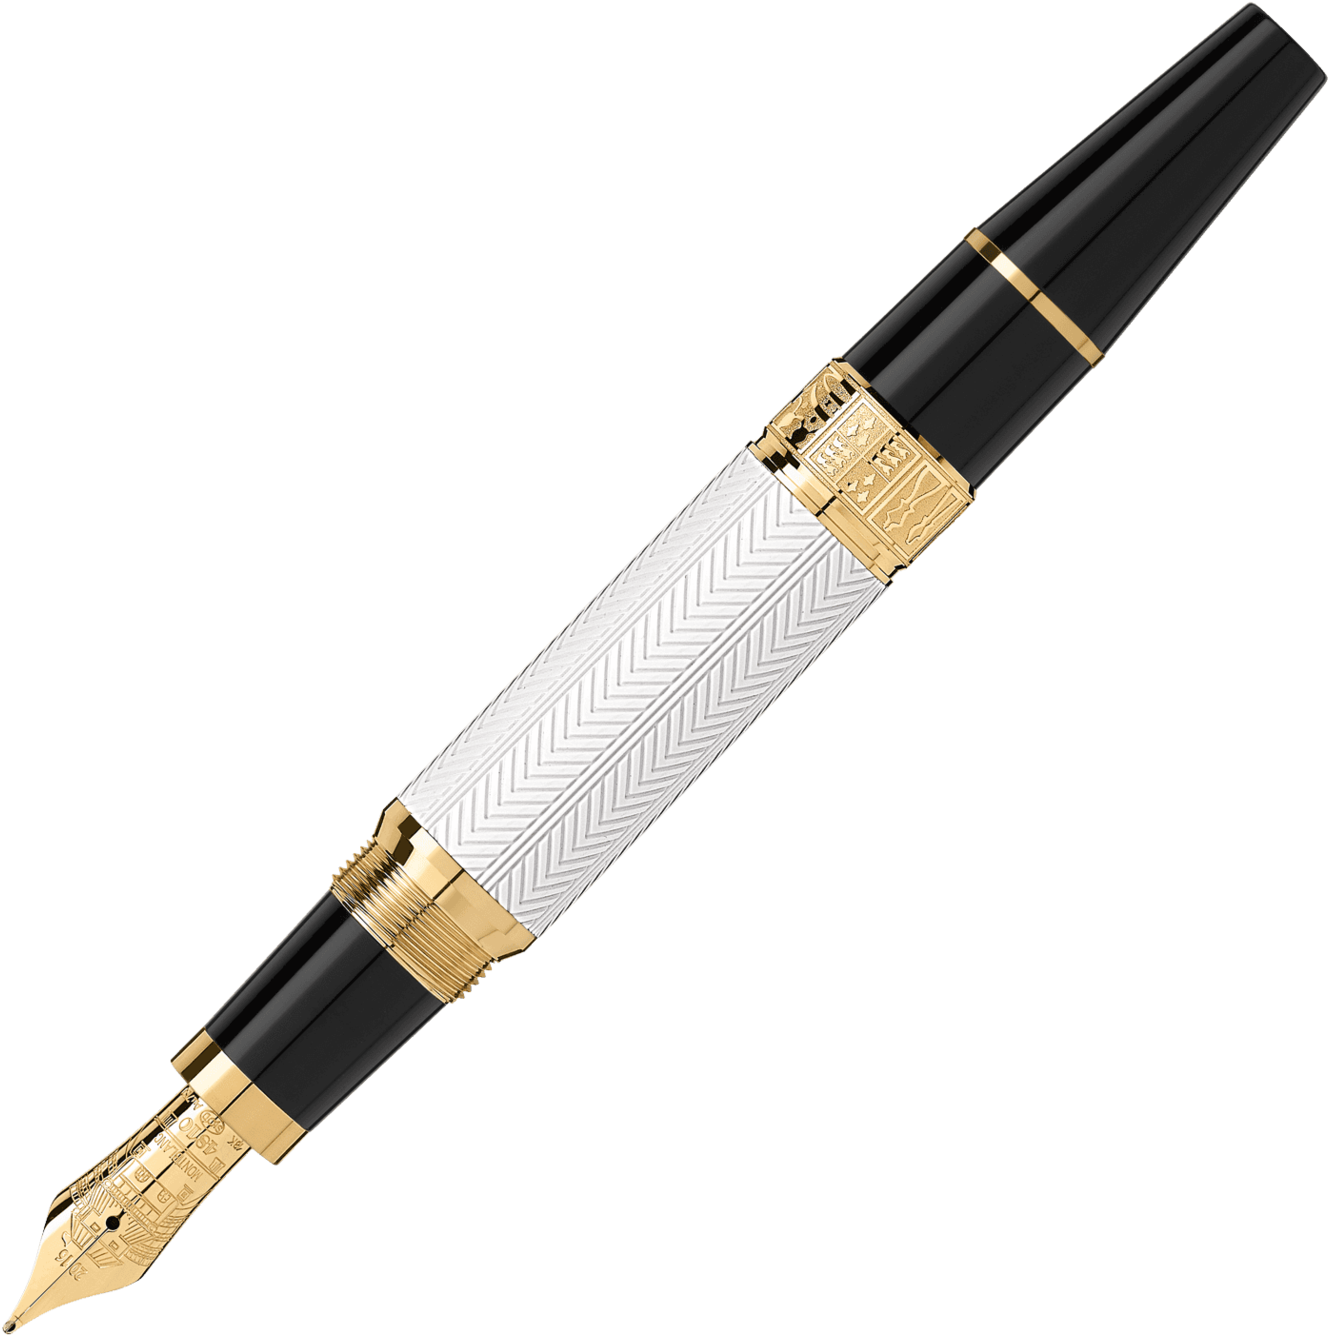 Stylo Plume Montblanc Édition Écrivains William Shakespeare - Montblanc Writers Edition 2016 William Shakespeare (1600x1600)